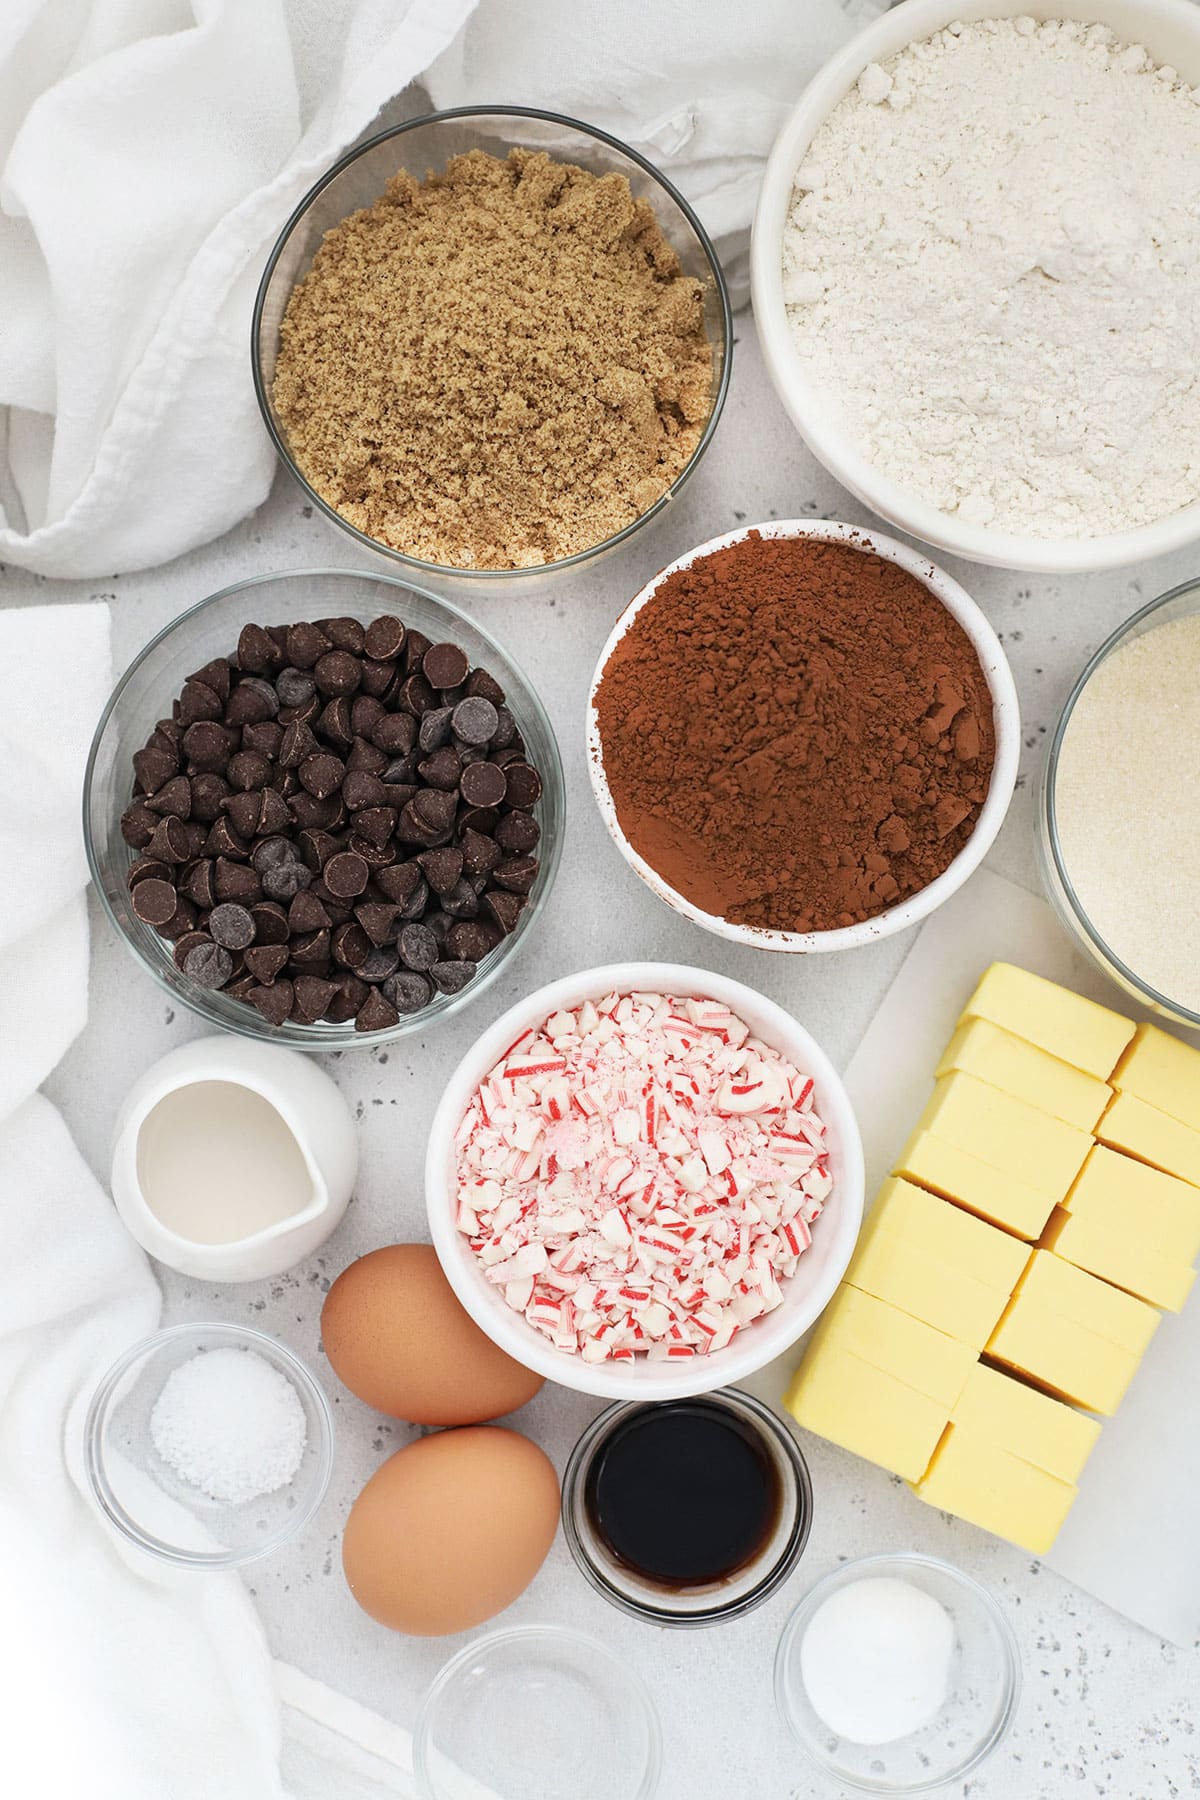 Ingredients for gluten-free chocolate peppermint cookies in small bowls